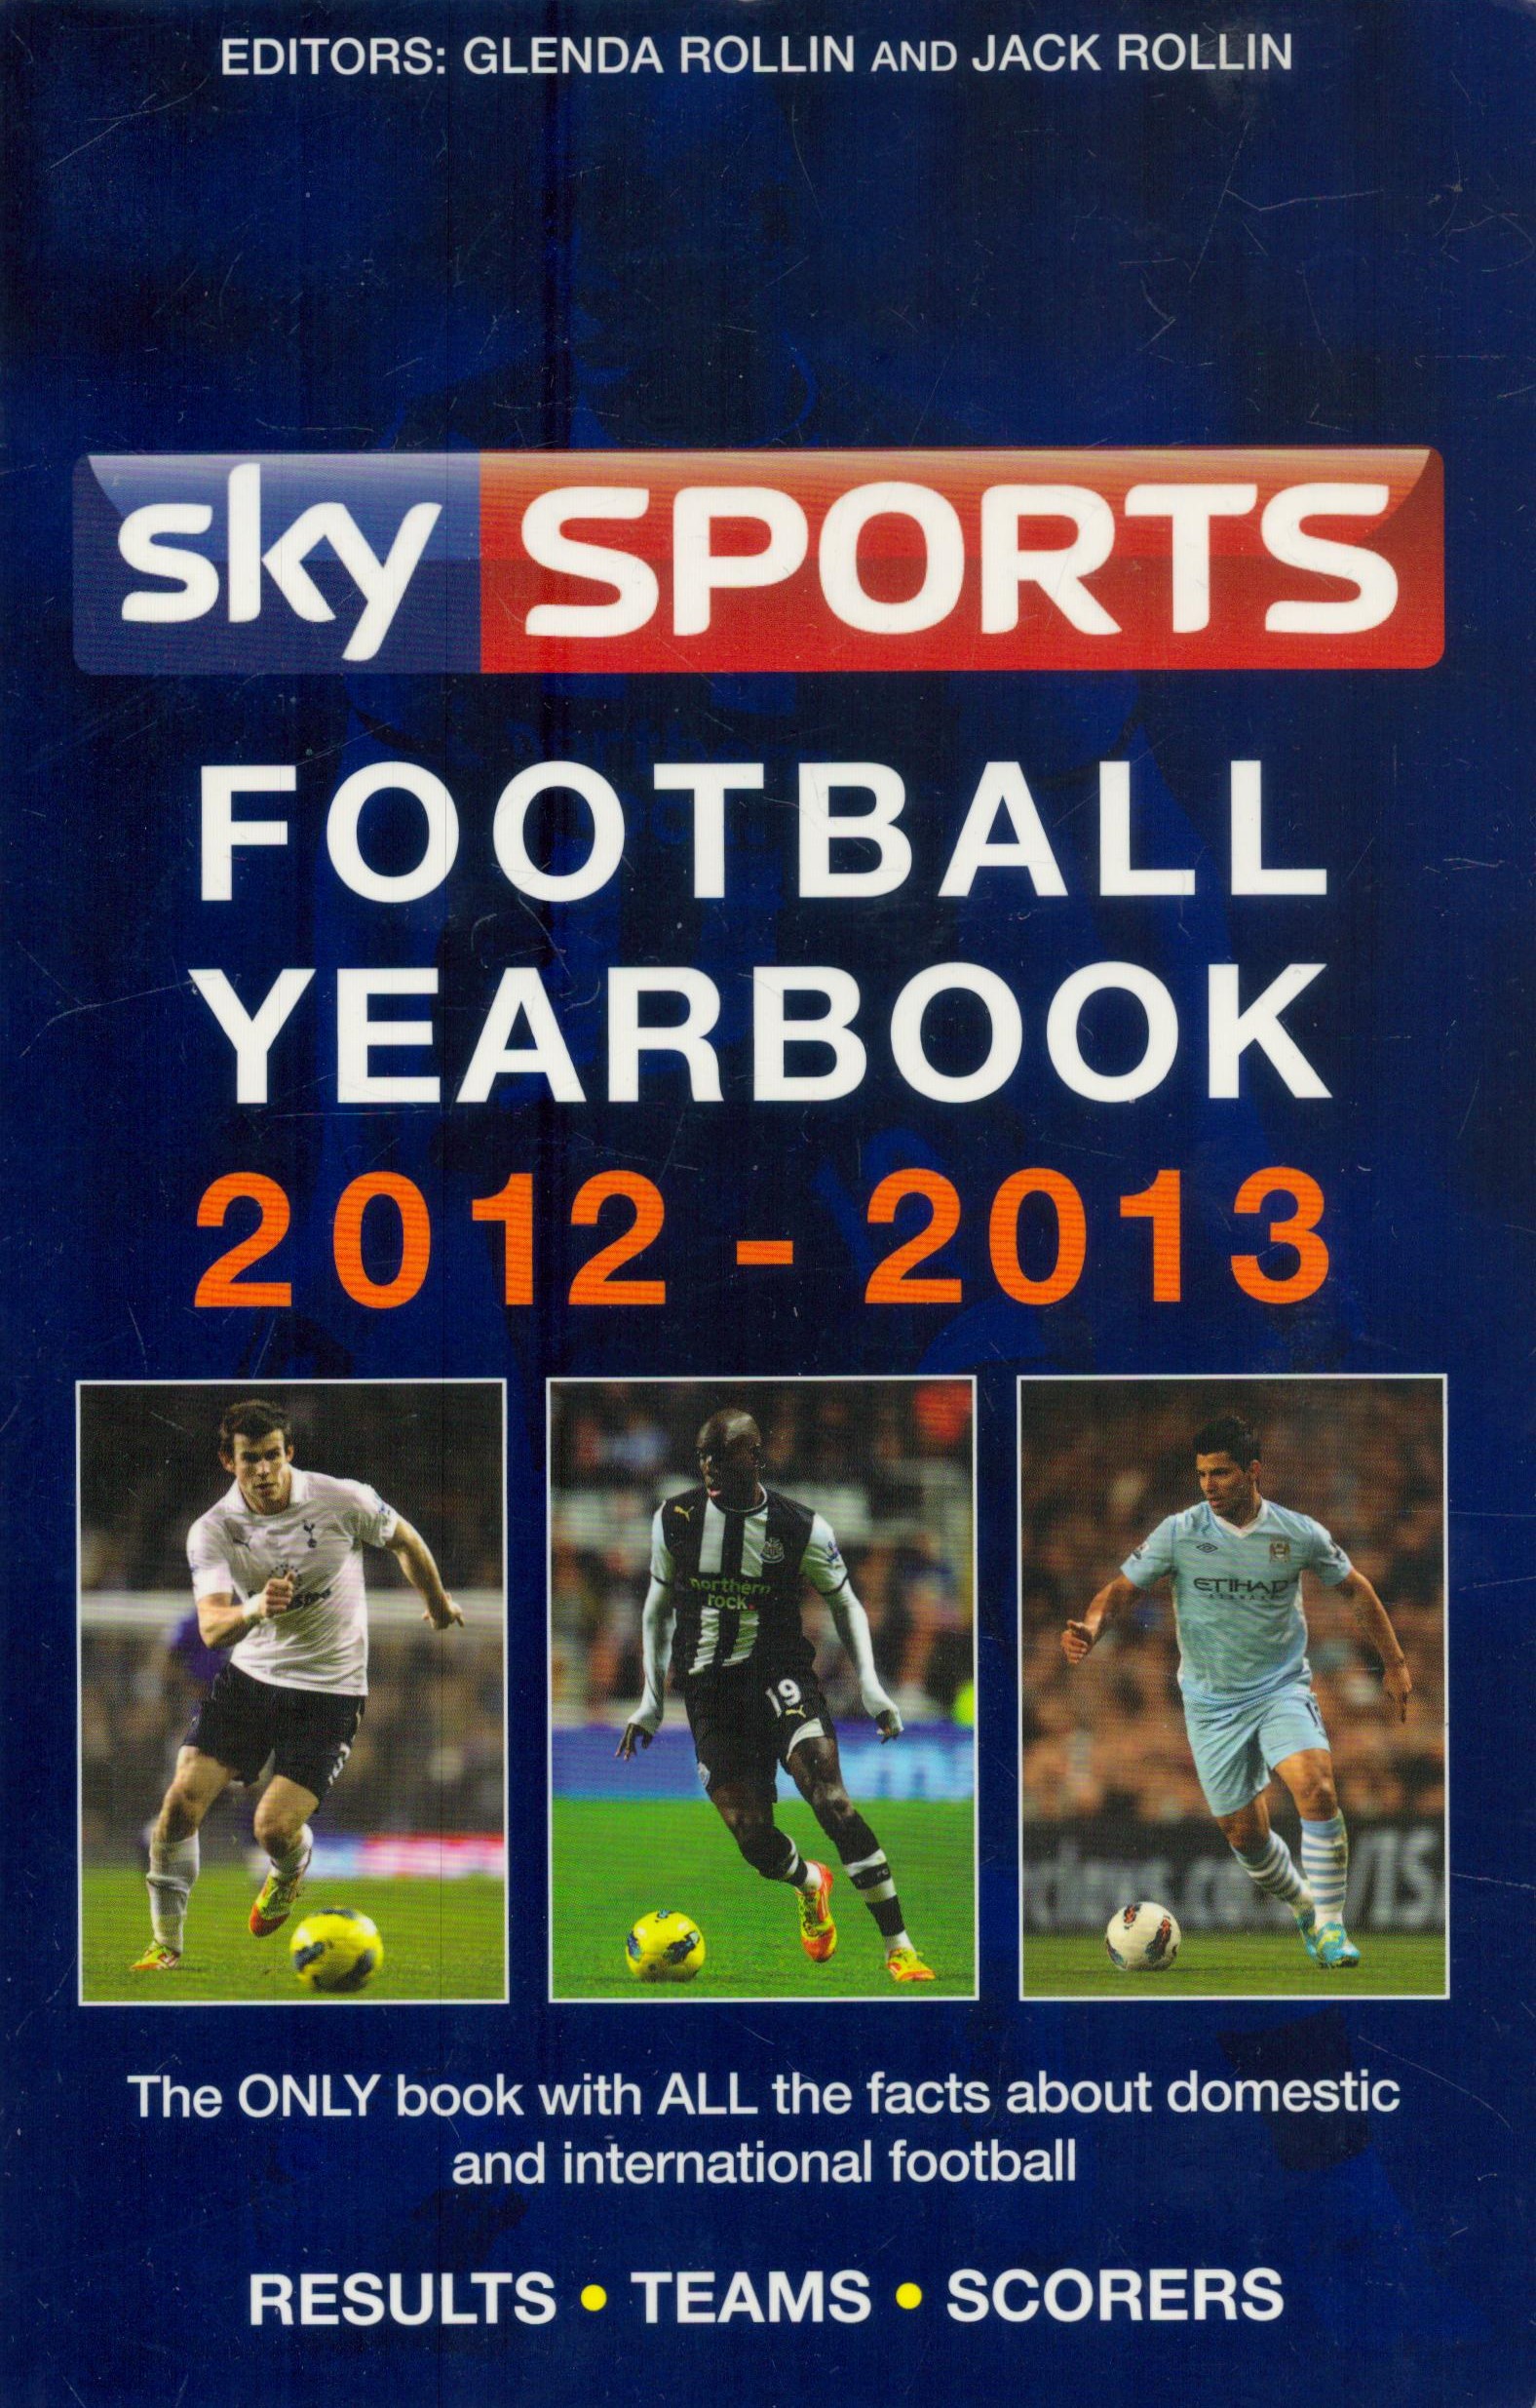 Sky Sports Football Yearbook 2012-2013 By Glenda Rollin, Jack Rollin paperback book. 1056 pages.